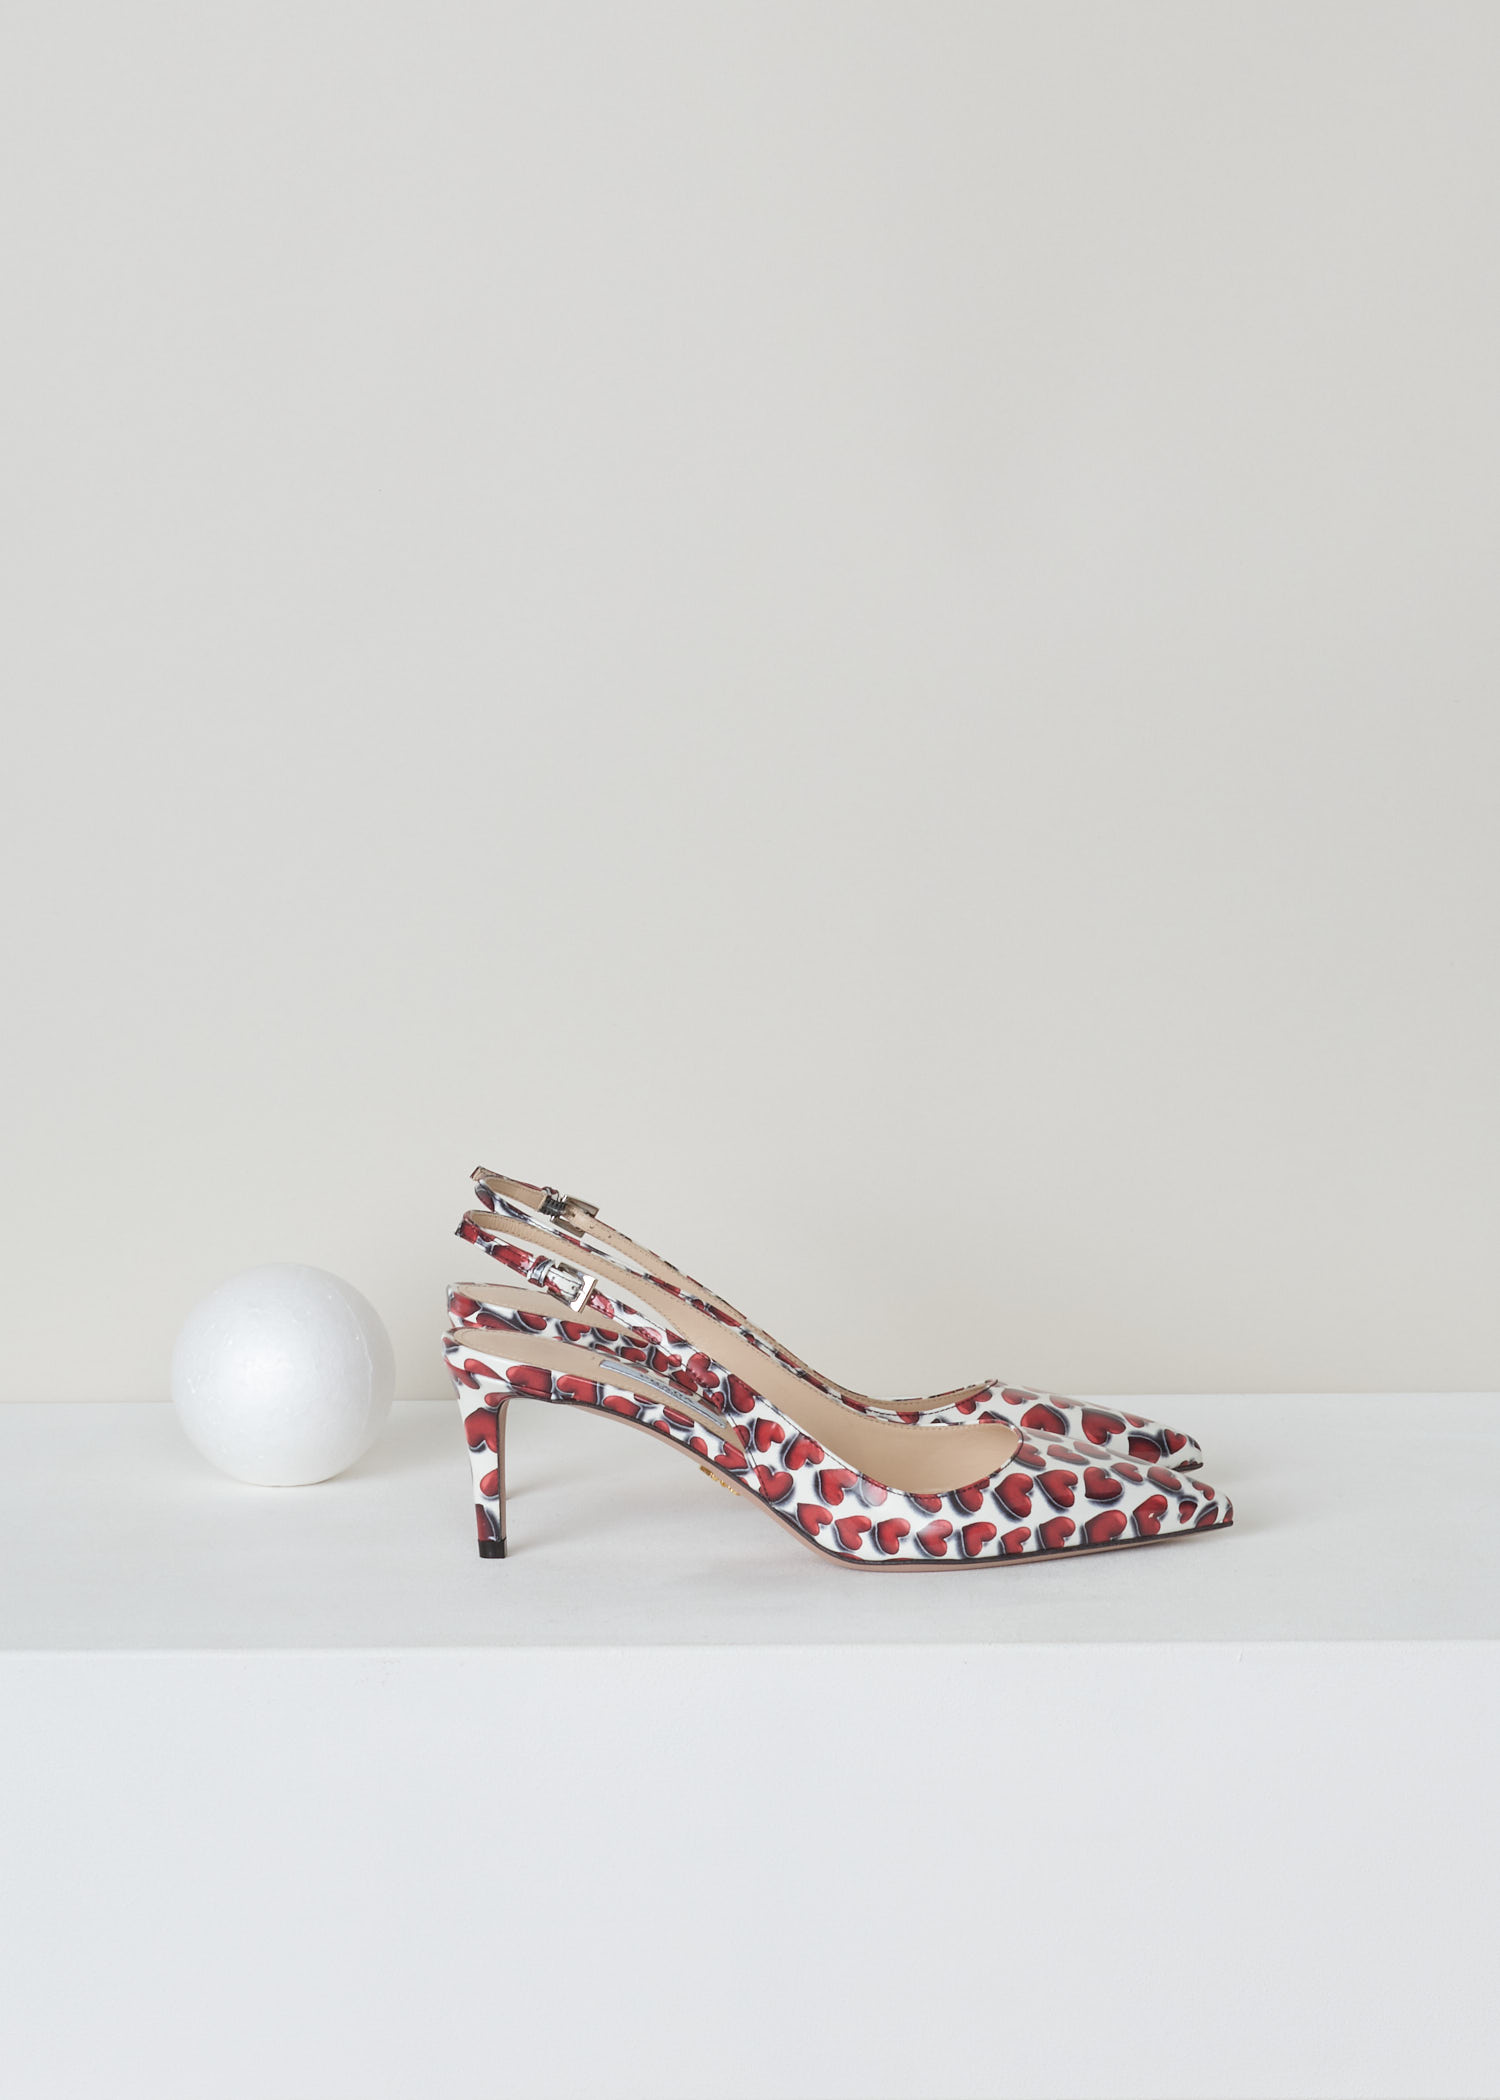 Prada, Red and white patent leather heart print, vernice_cuori_1I833I_F0D56_scarlatto, red white, side, Red and white heart printed slingback. Pointed toe and mid high stiletto heel. With a gold-tone logo plaque on the sole.